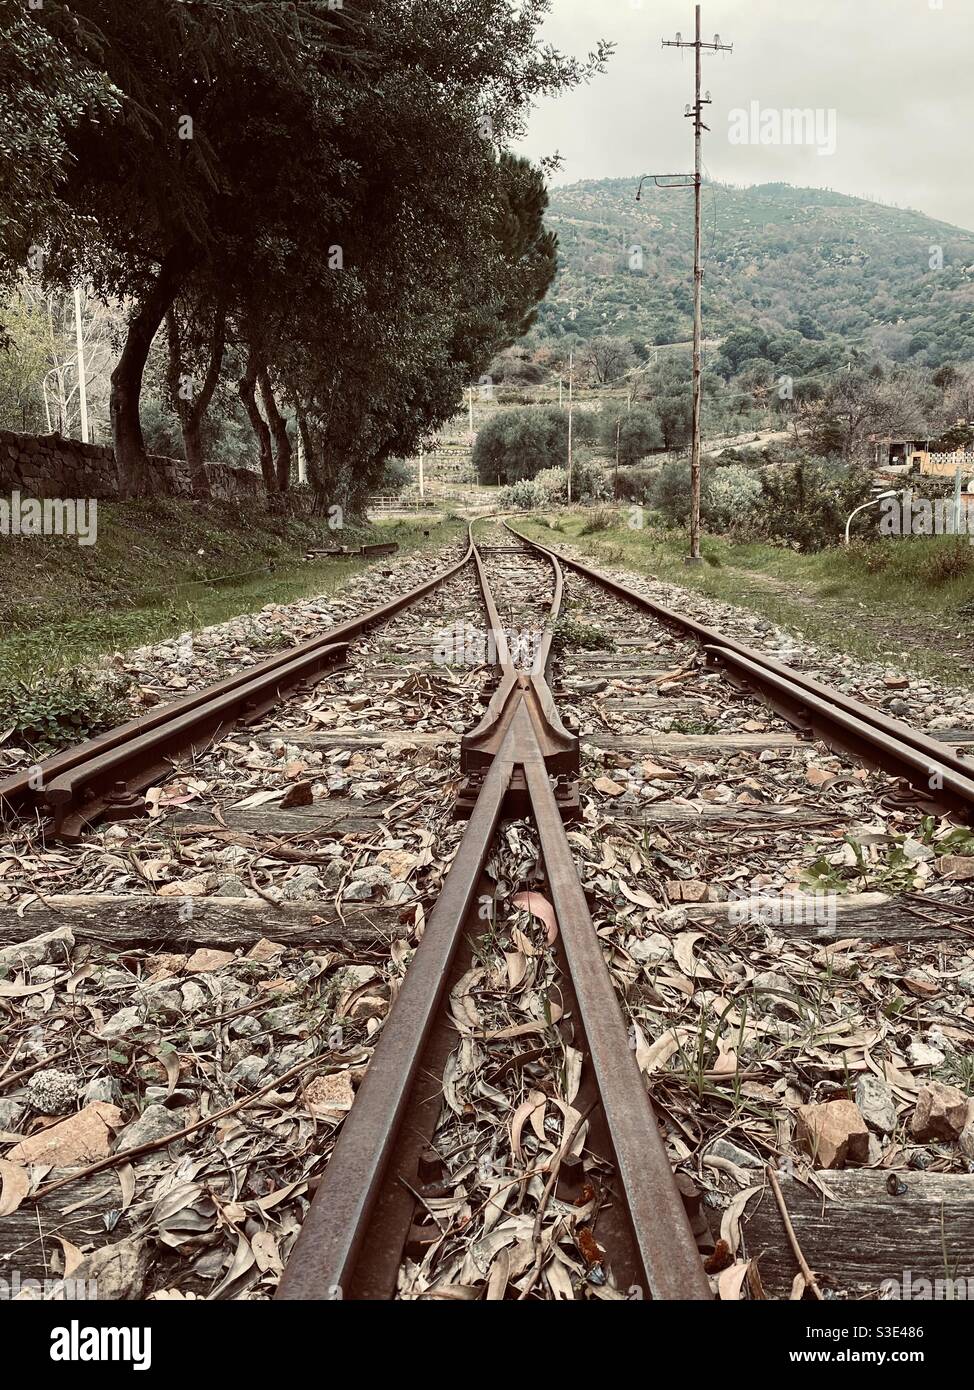 Railroad of an old and dismissed train station in a rural town. Stock Photo